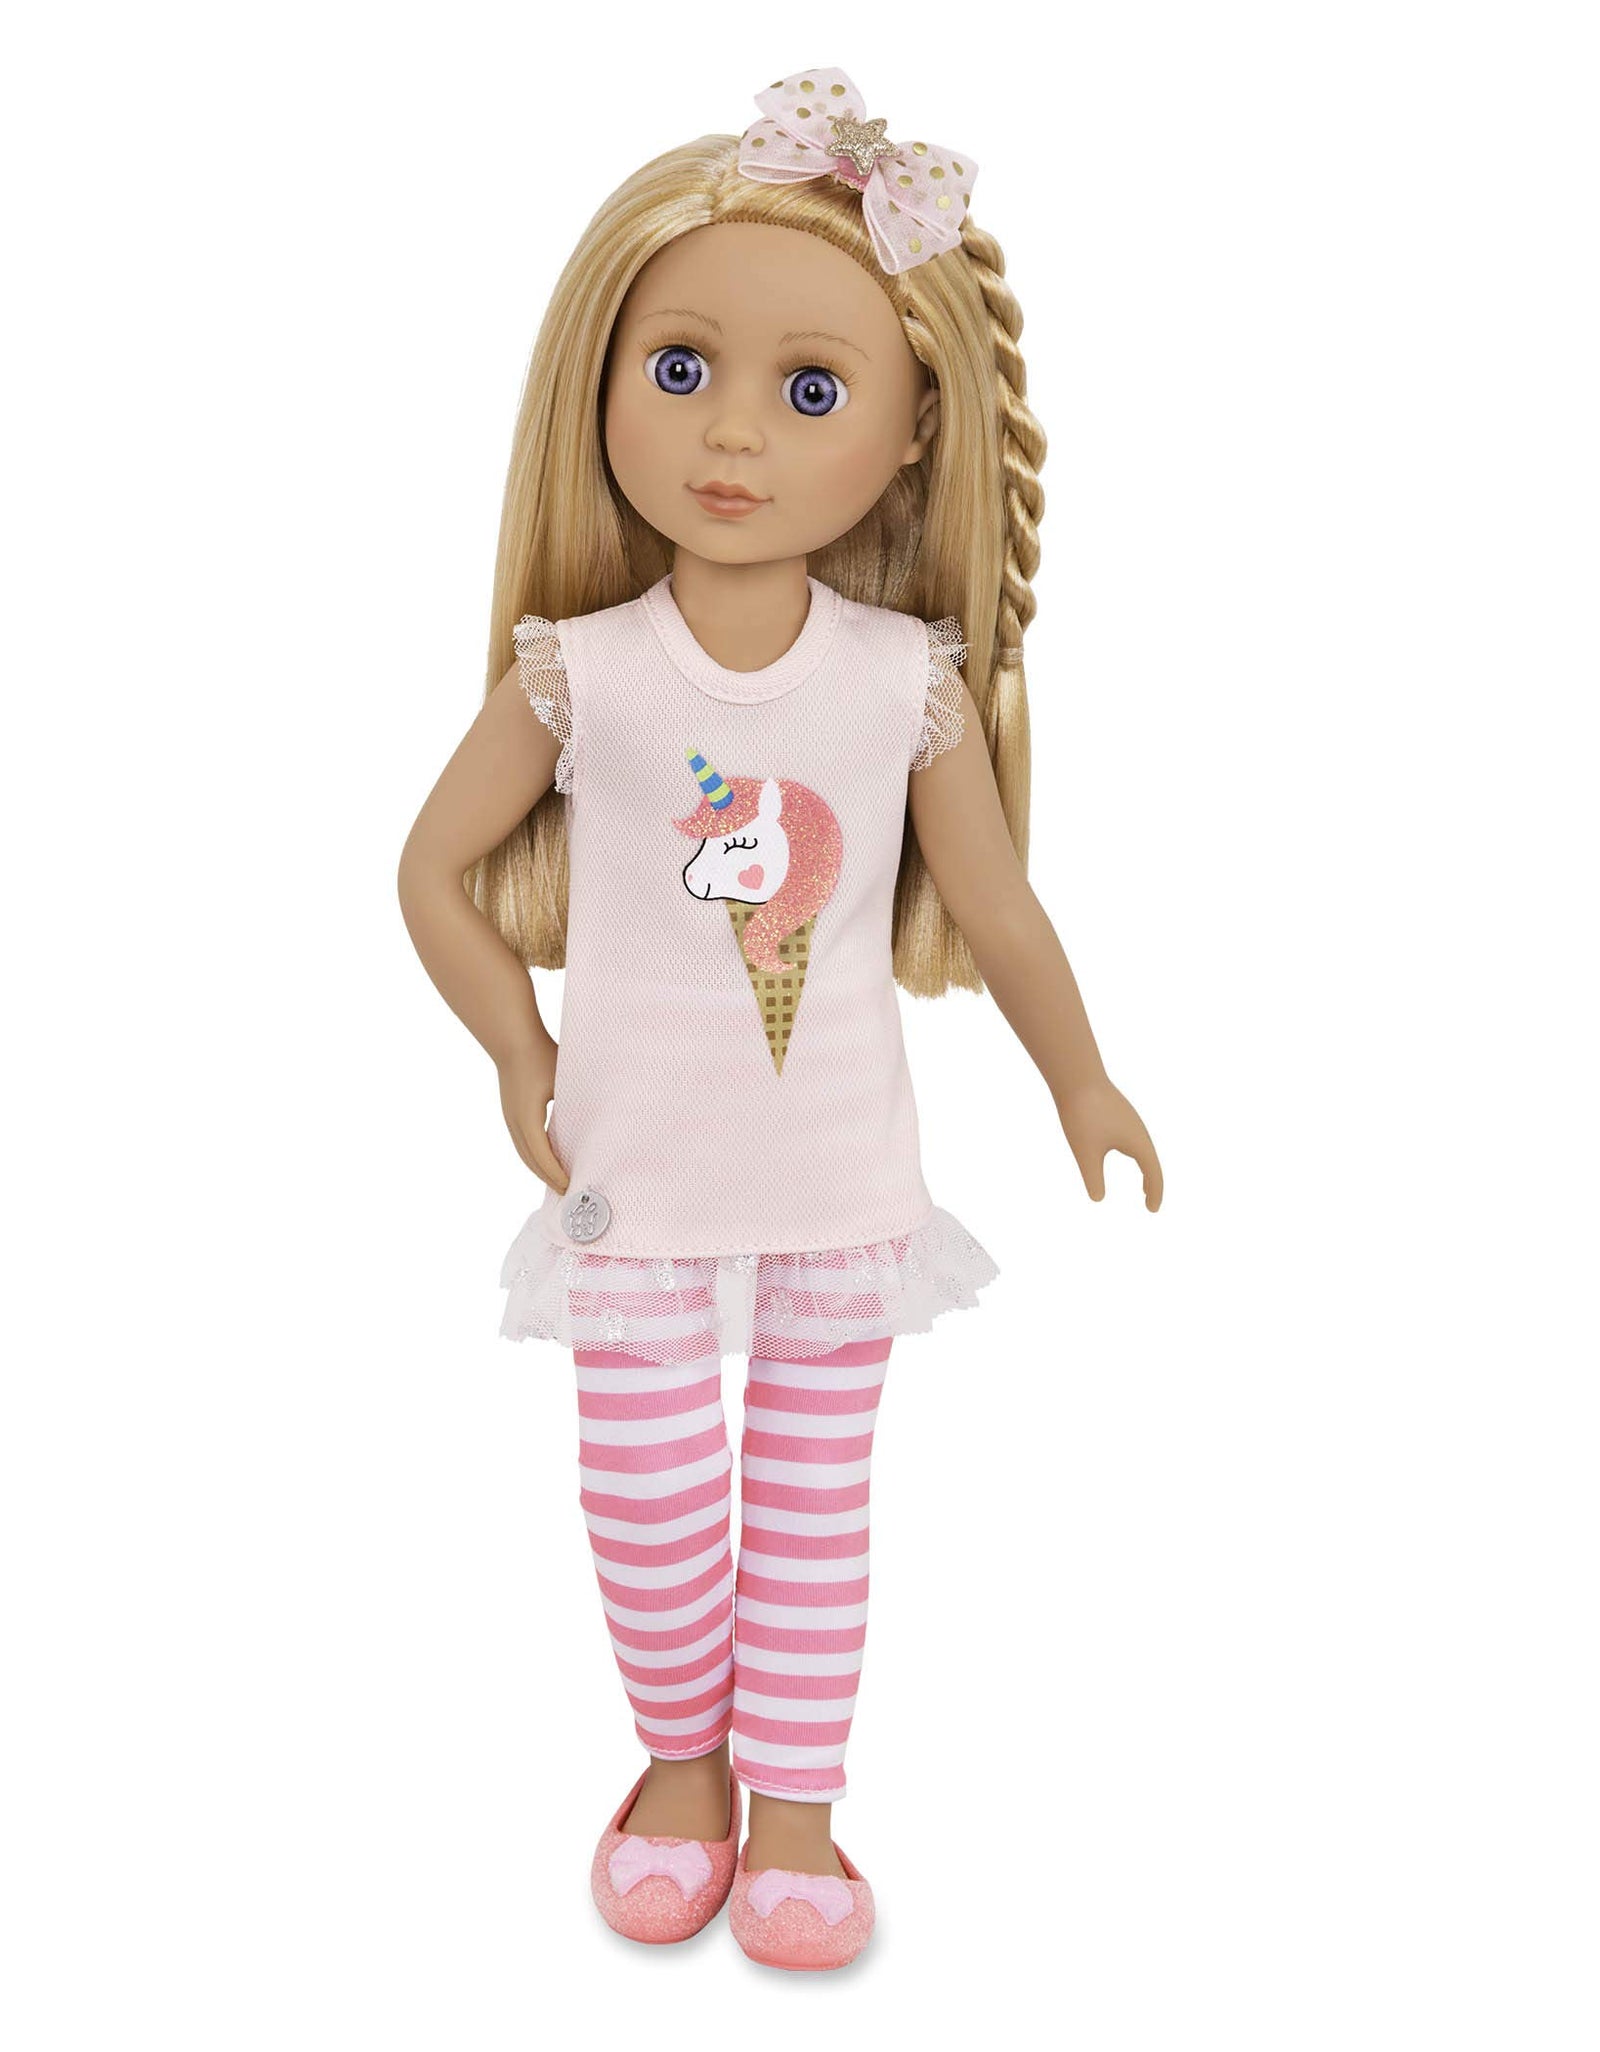 Glitter Girls Doll by Battat - Lacy 14" Poseable Fashion Doll - Dolls for Girls Age 3 and Up